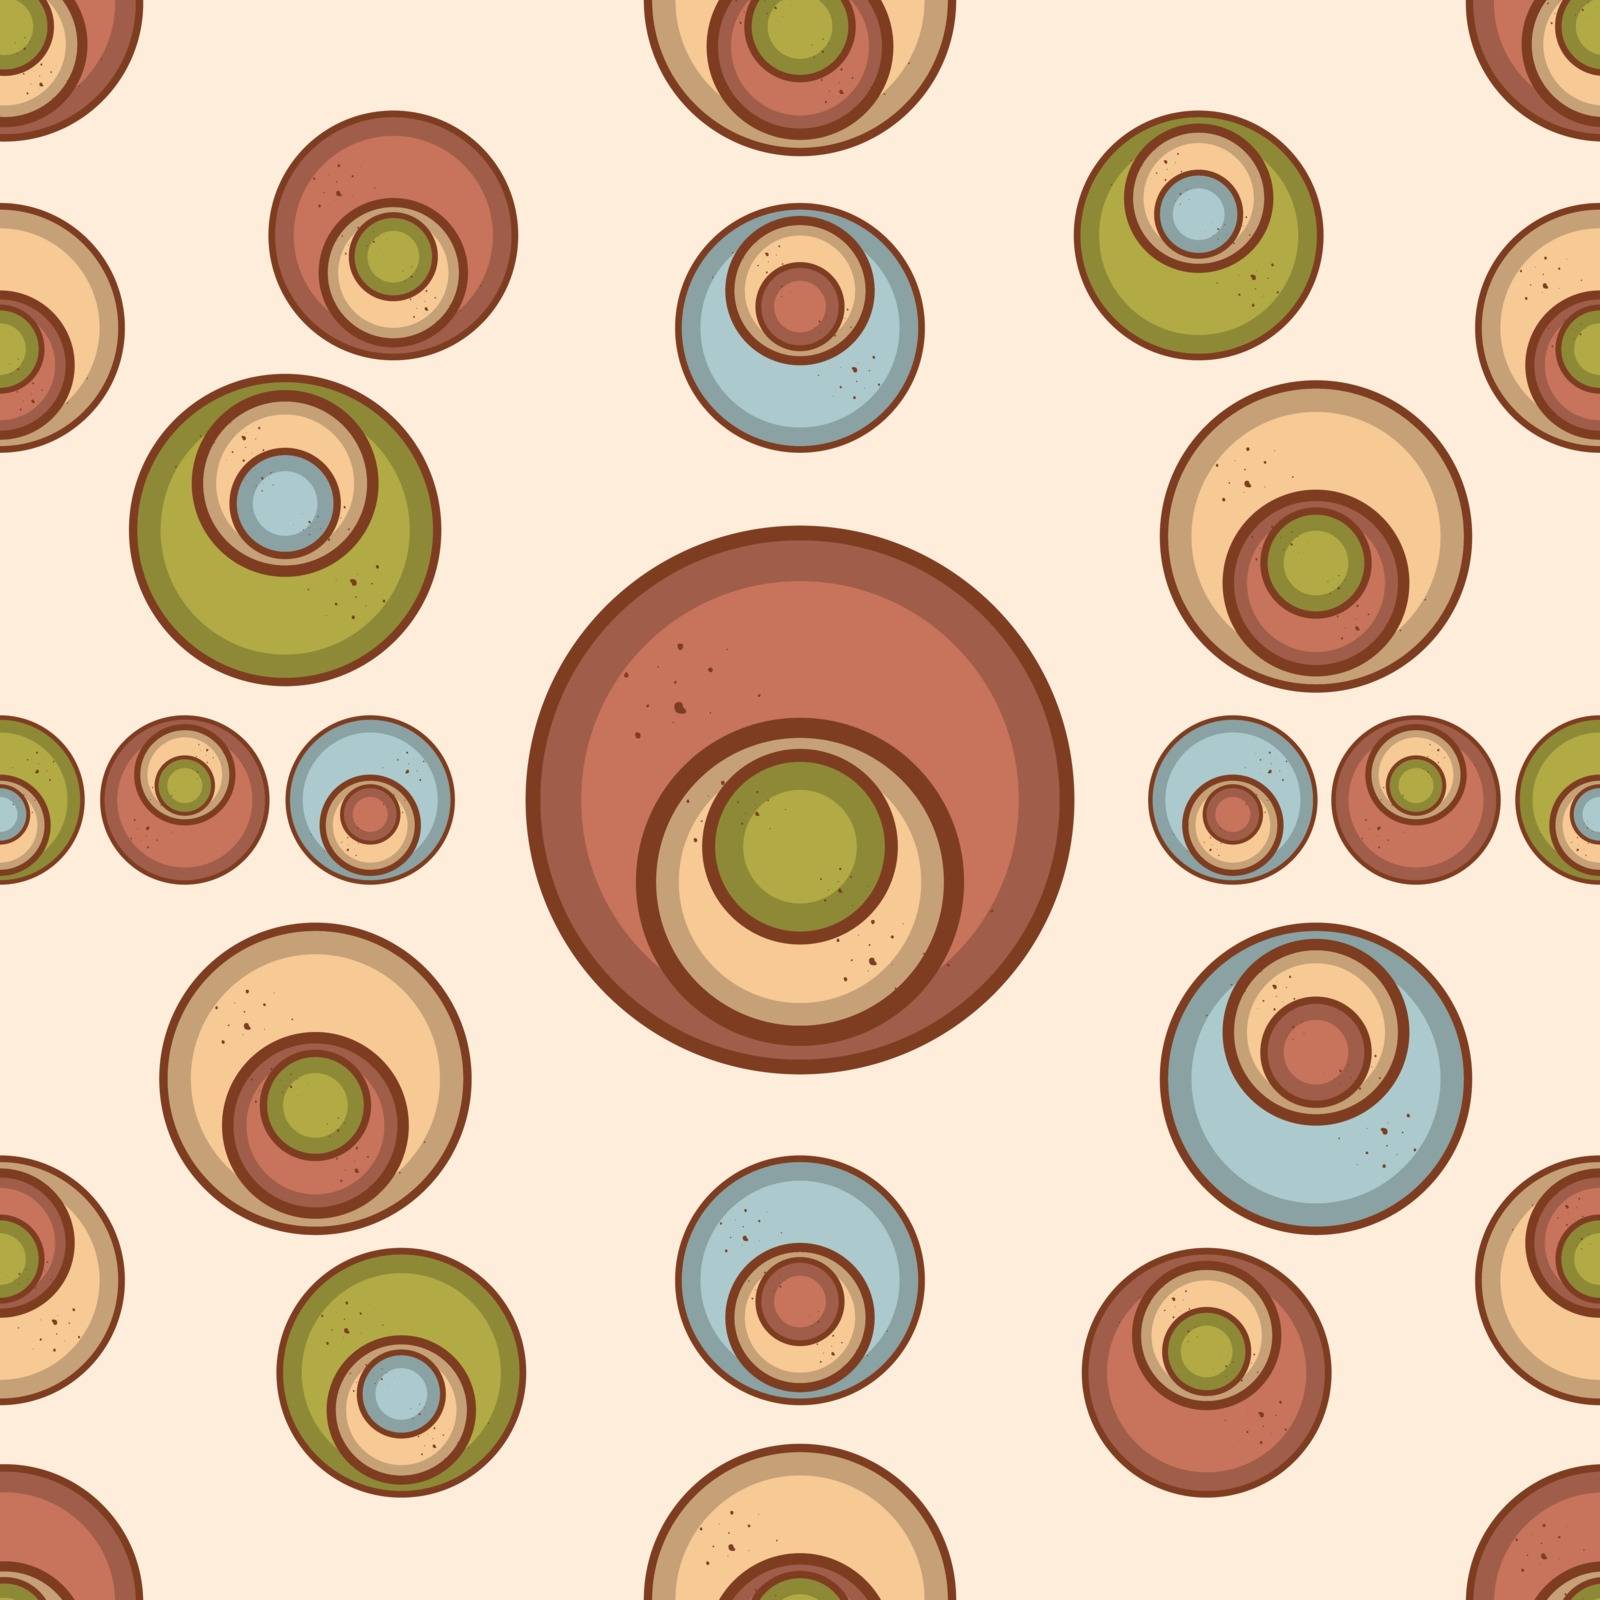 Handmade clay pottery plates with colored enamel. Simple vector illustration. Seamless pattern